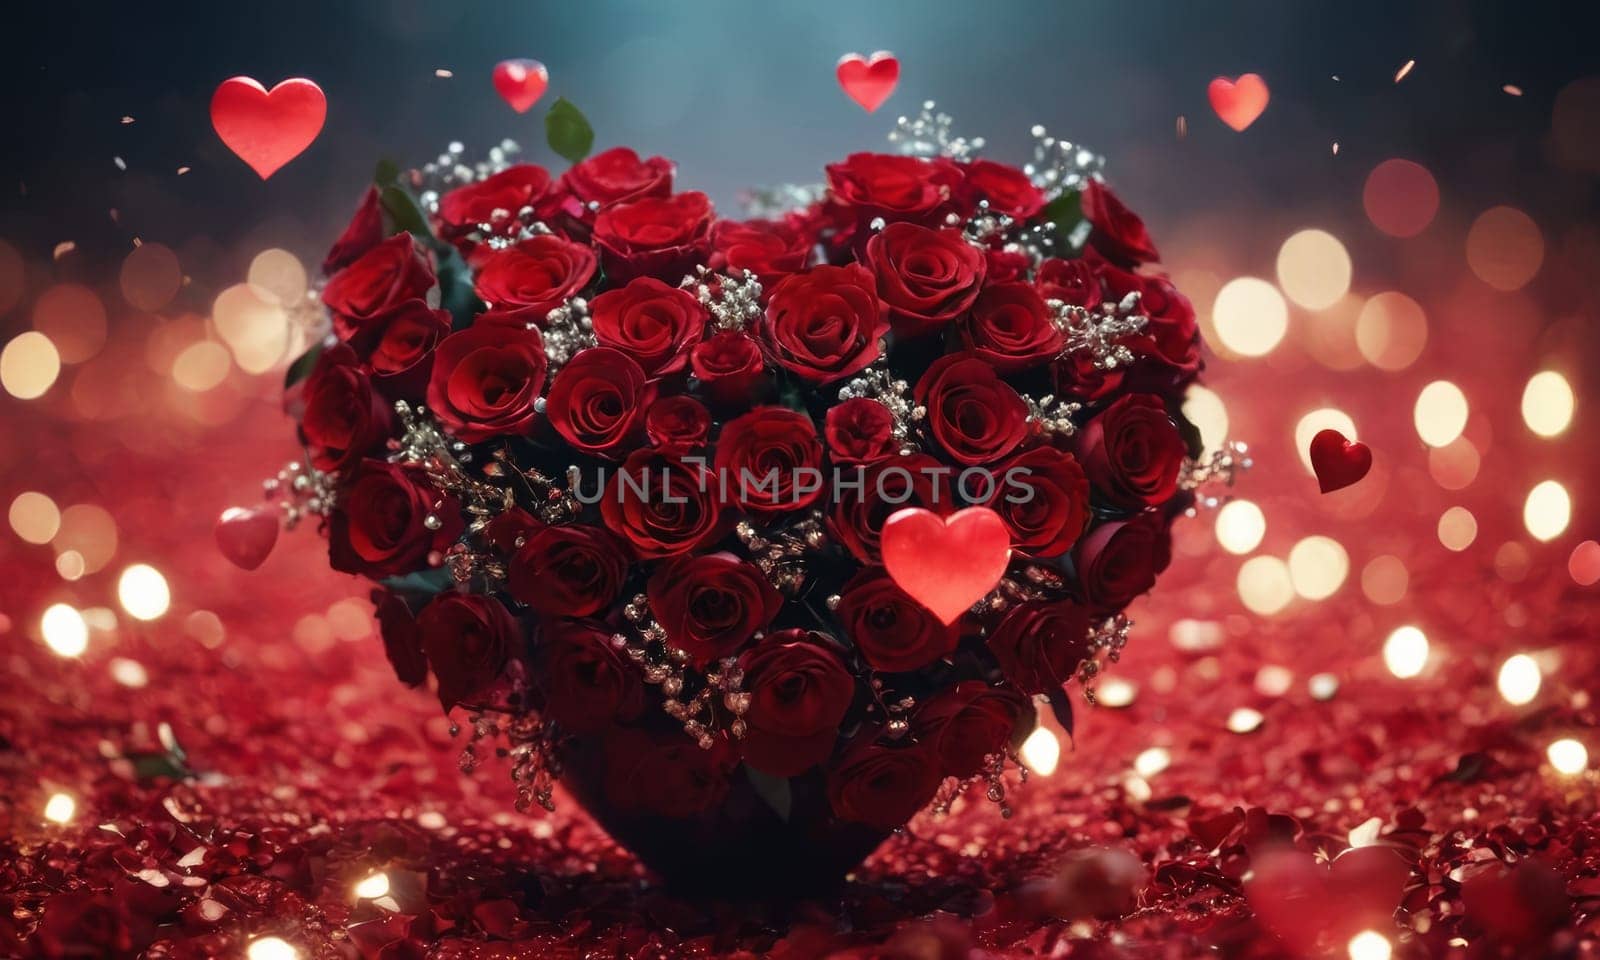 Glistening hearts rest amidst a shower of smaller heart shapes. The radiant glow and the deep red hue evoke a sense of warmth and affection. Ideal for expressing love and romance. Valentine's Day